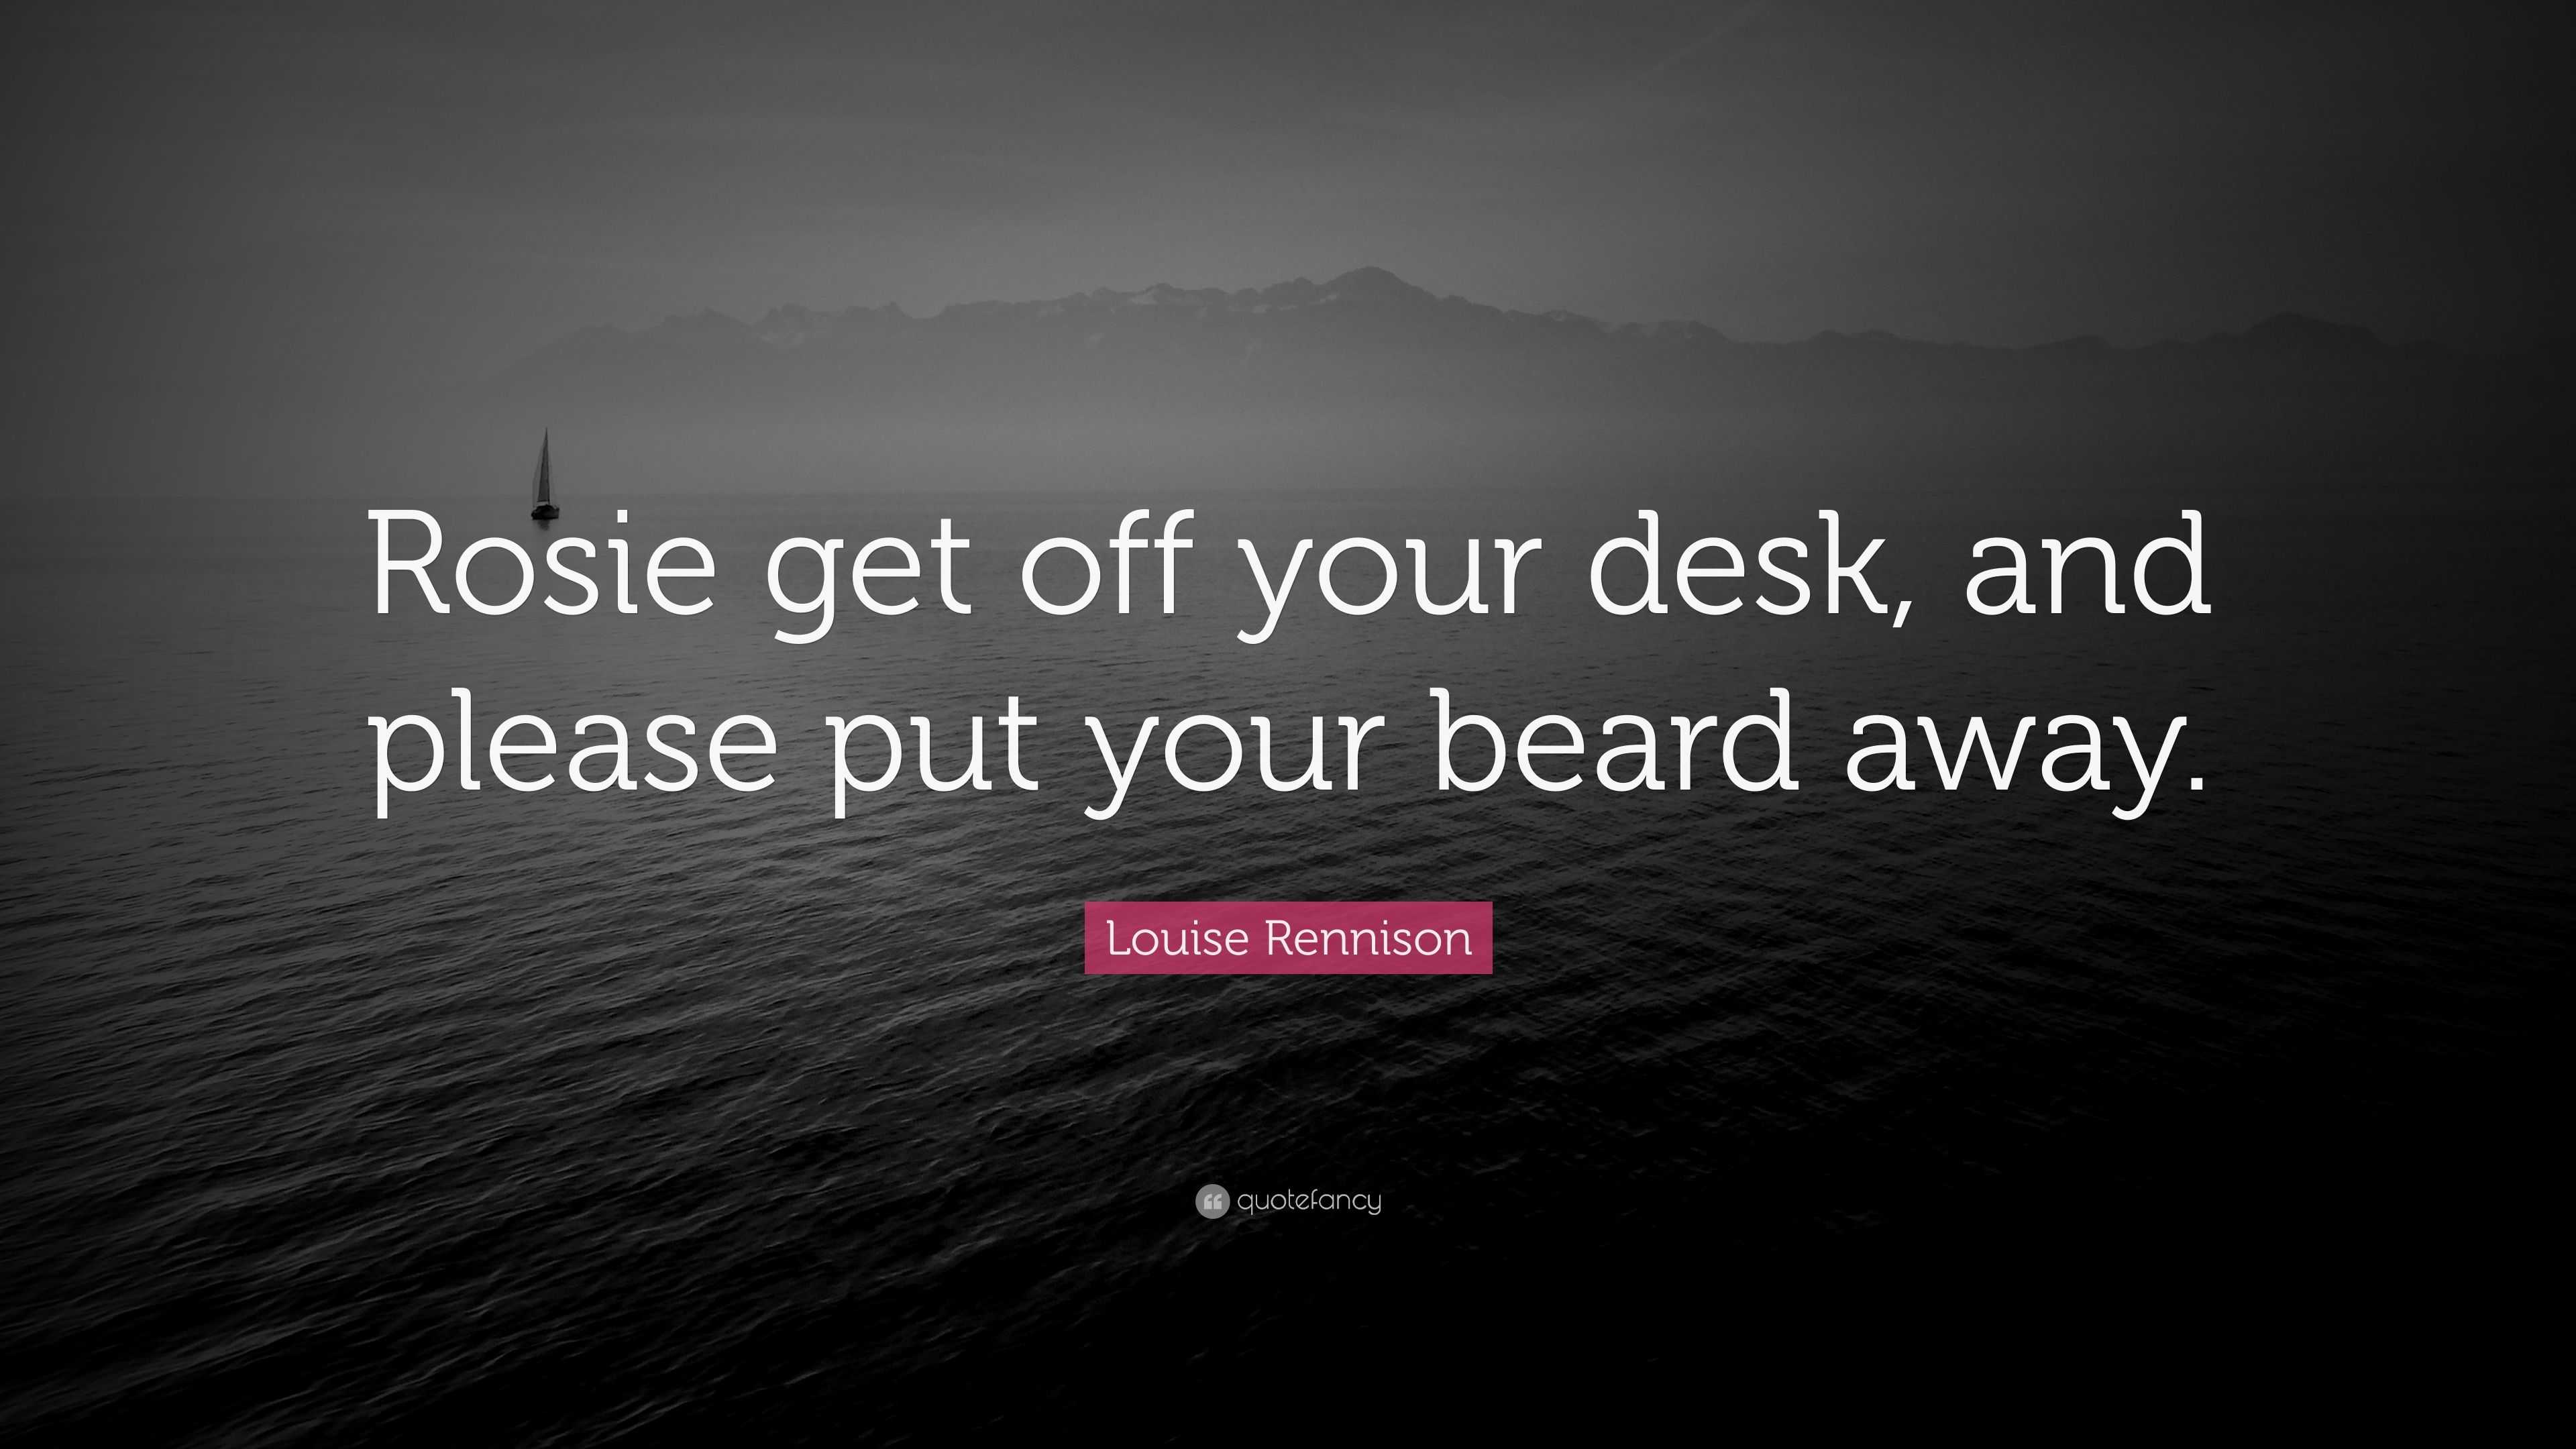 Louise Rennison Quote Rosie Get Off Your Desk And Please Put Your Beard Away